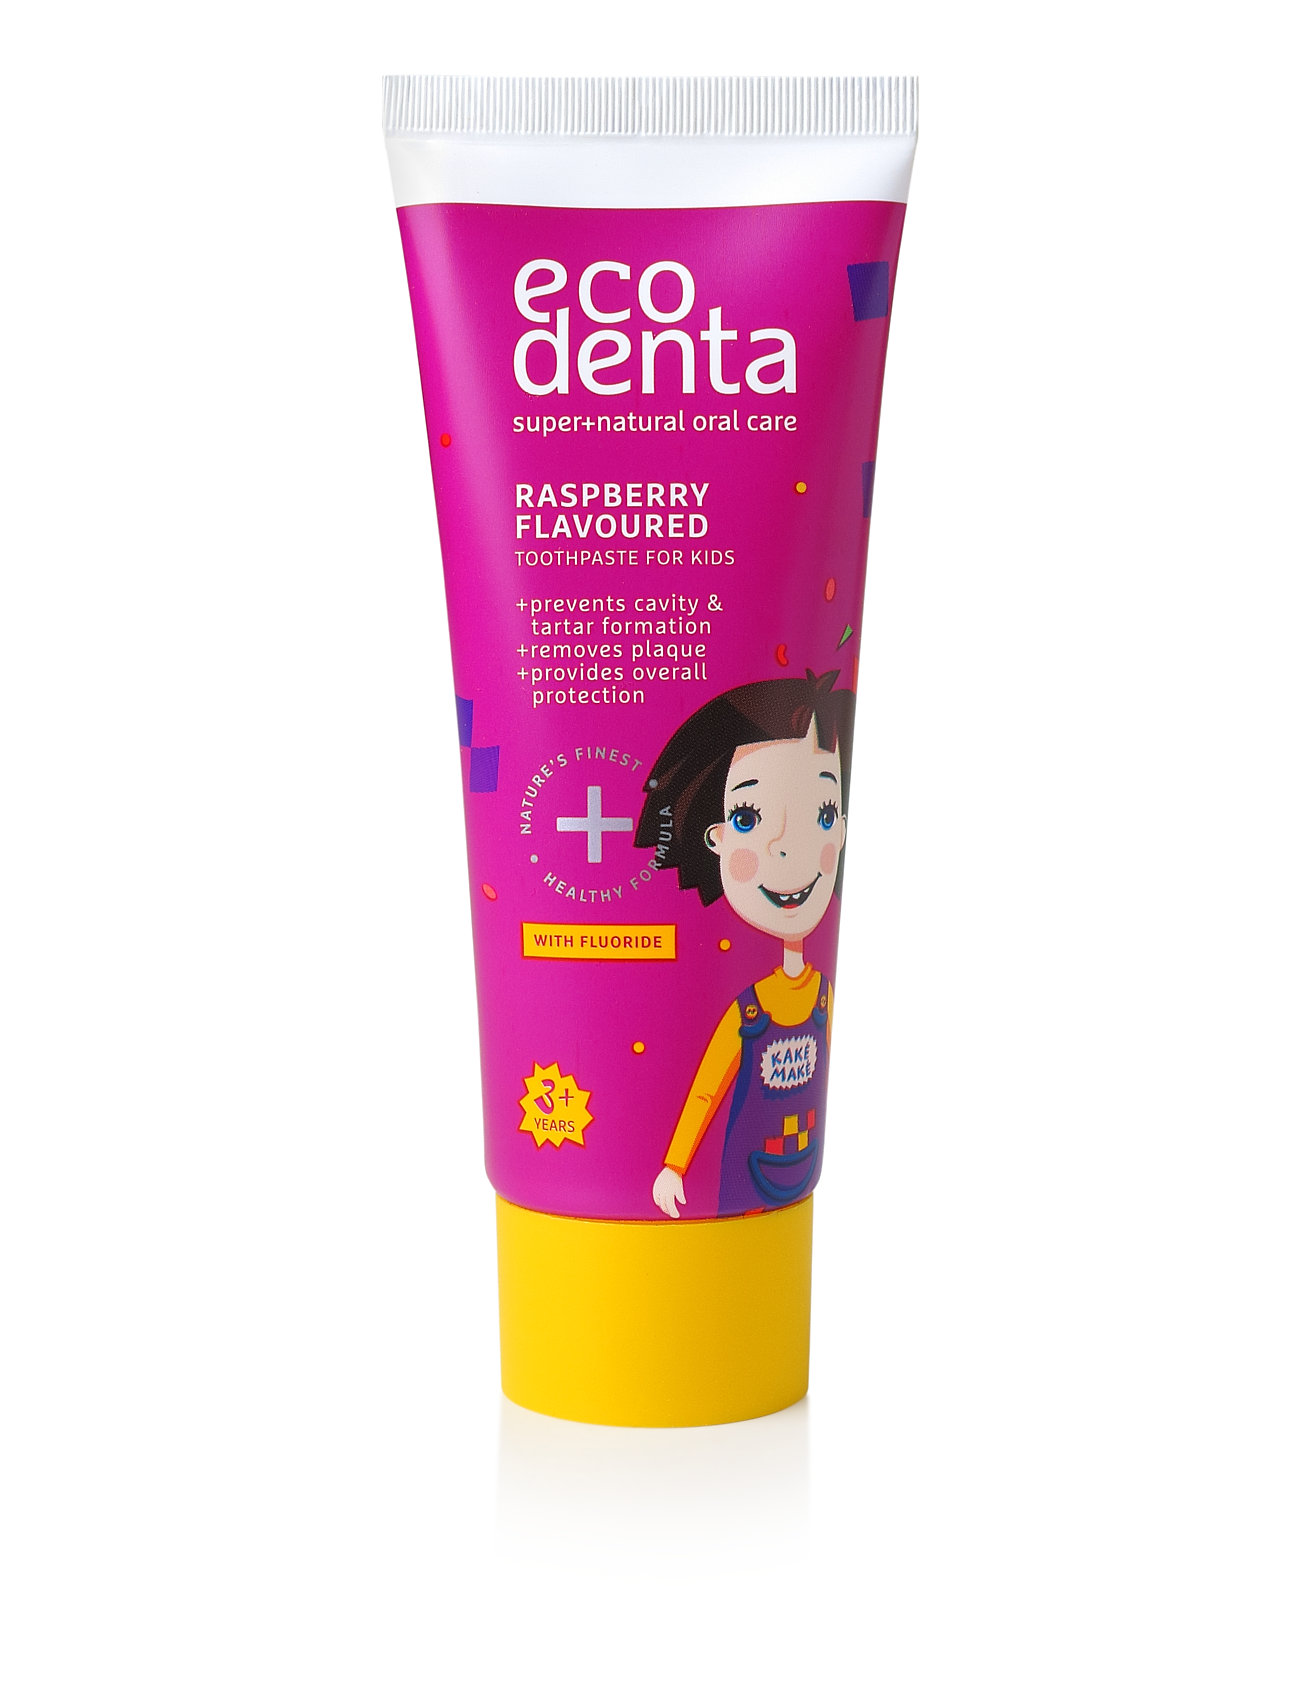 Ecodenta Raspberry Flavoured Toothpaste For Kids, 3+ Y.o. 75 Ml Home Bath Time Health & Hygiene Toothbrushes Nude Ecodenta